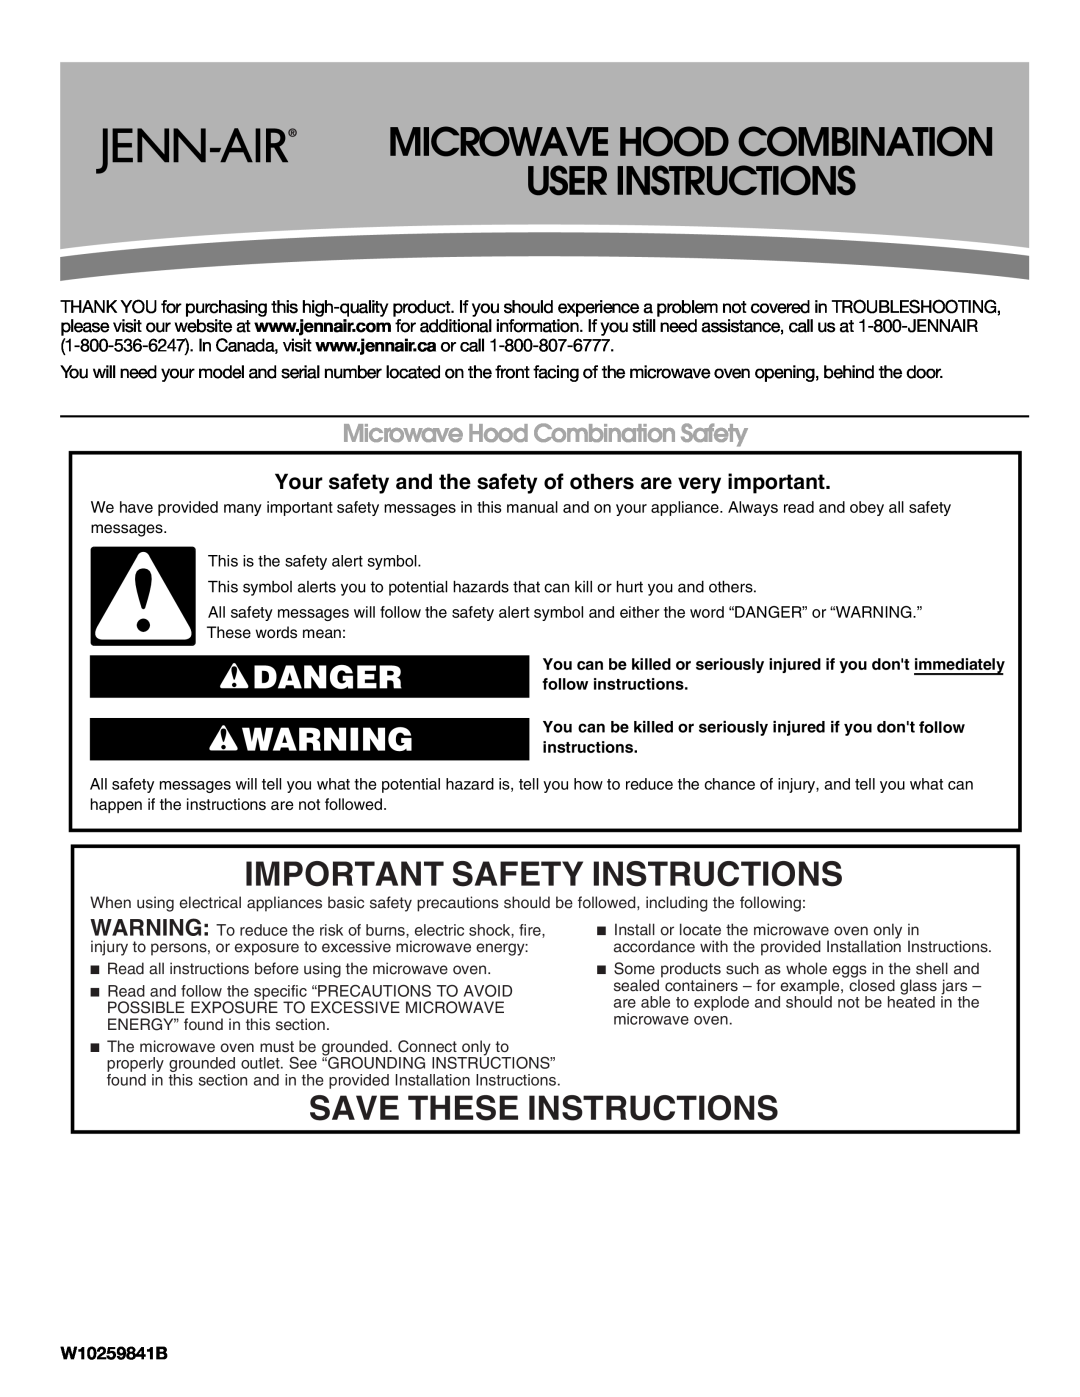 Jenn-Air W10259841B important safety instructions Microwave Hood Combination User Instructions, Save These Instructions 